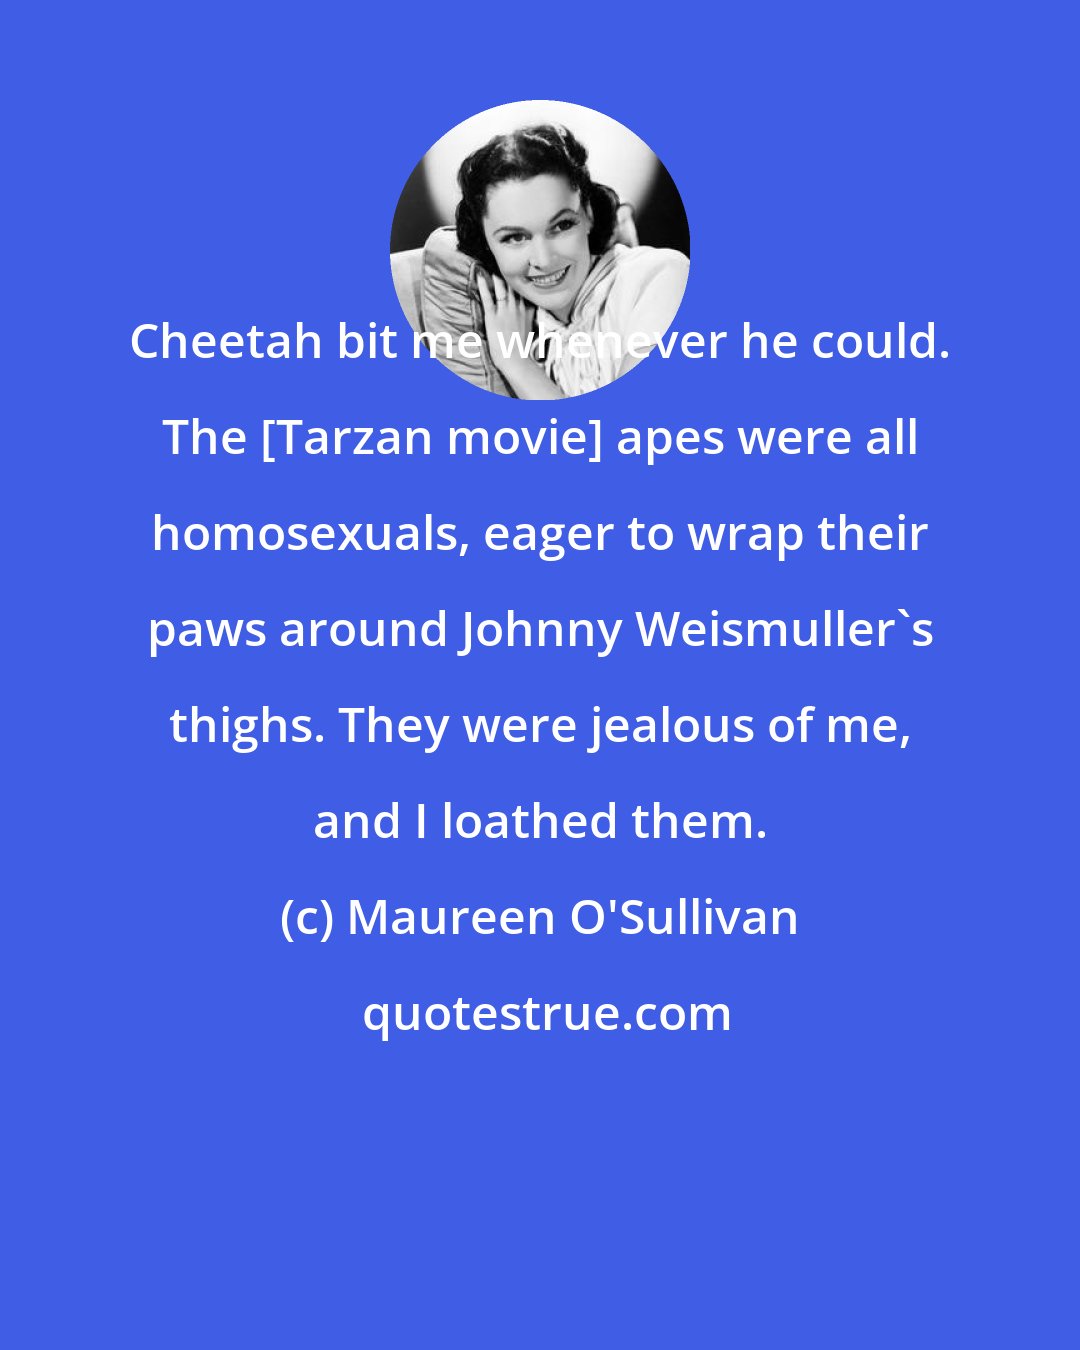 Maureen O'Sullivan: Cheetah bit me whenever he could. The [Tarzan movie] apes were all homosexuals, eager to wrap their paws around Johnny Weismuller's thighs. They were jealous of me, and I loathed them.